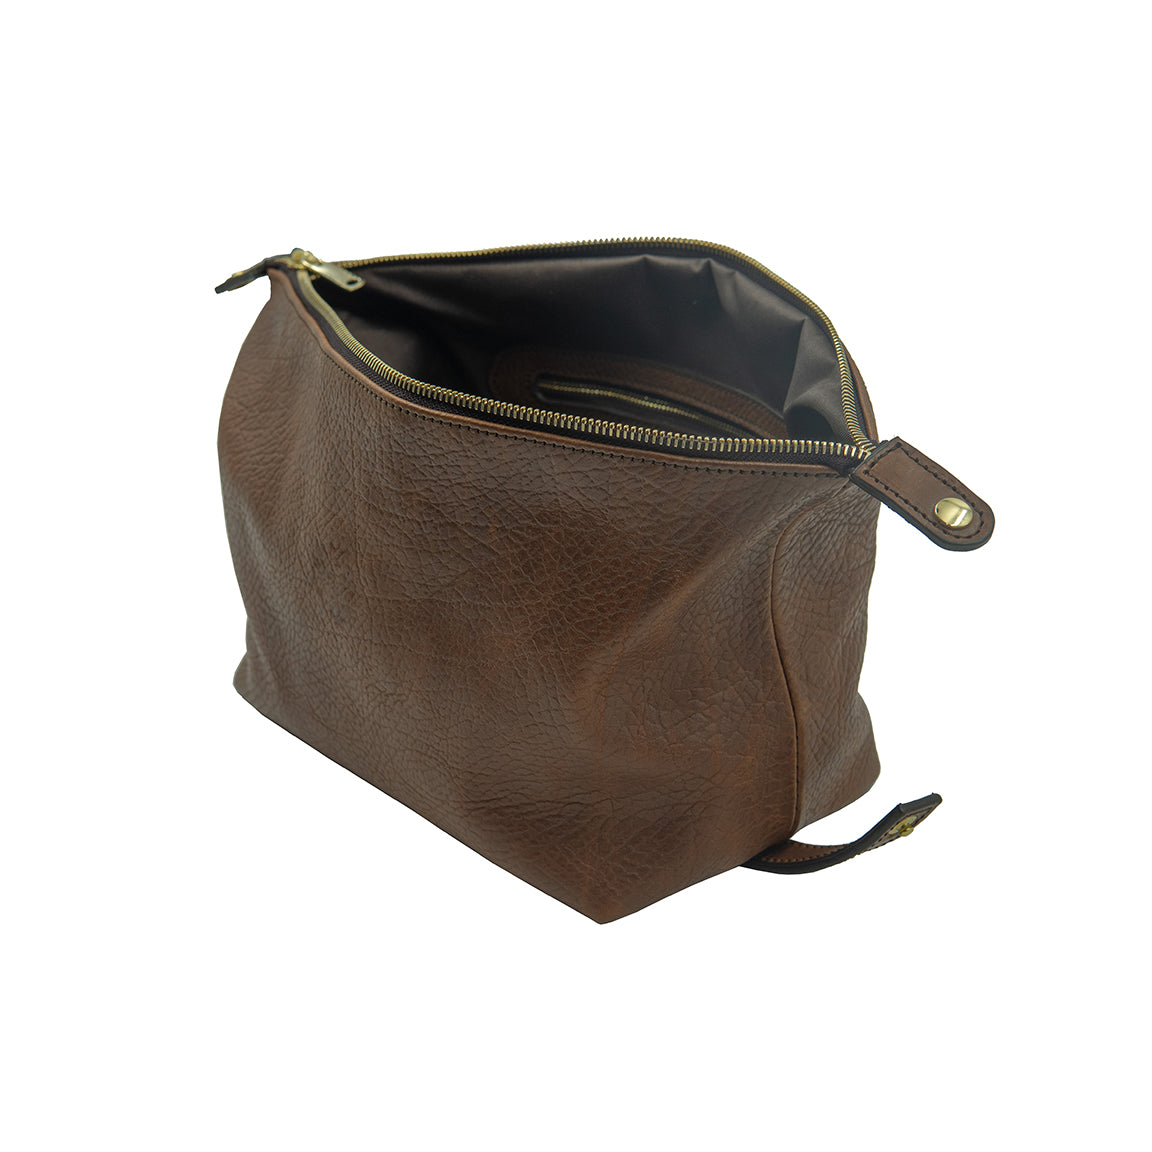 Kevin's Leather Dopp Kit-Luggage-Kevin's Fine Outdoor Gear & Apparel